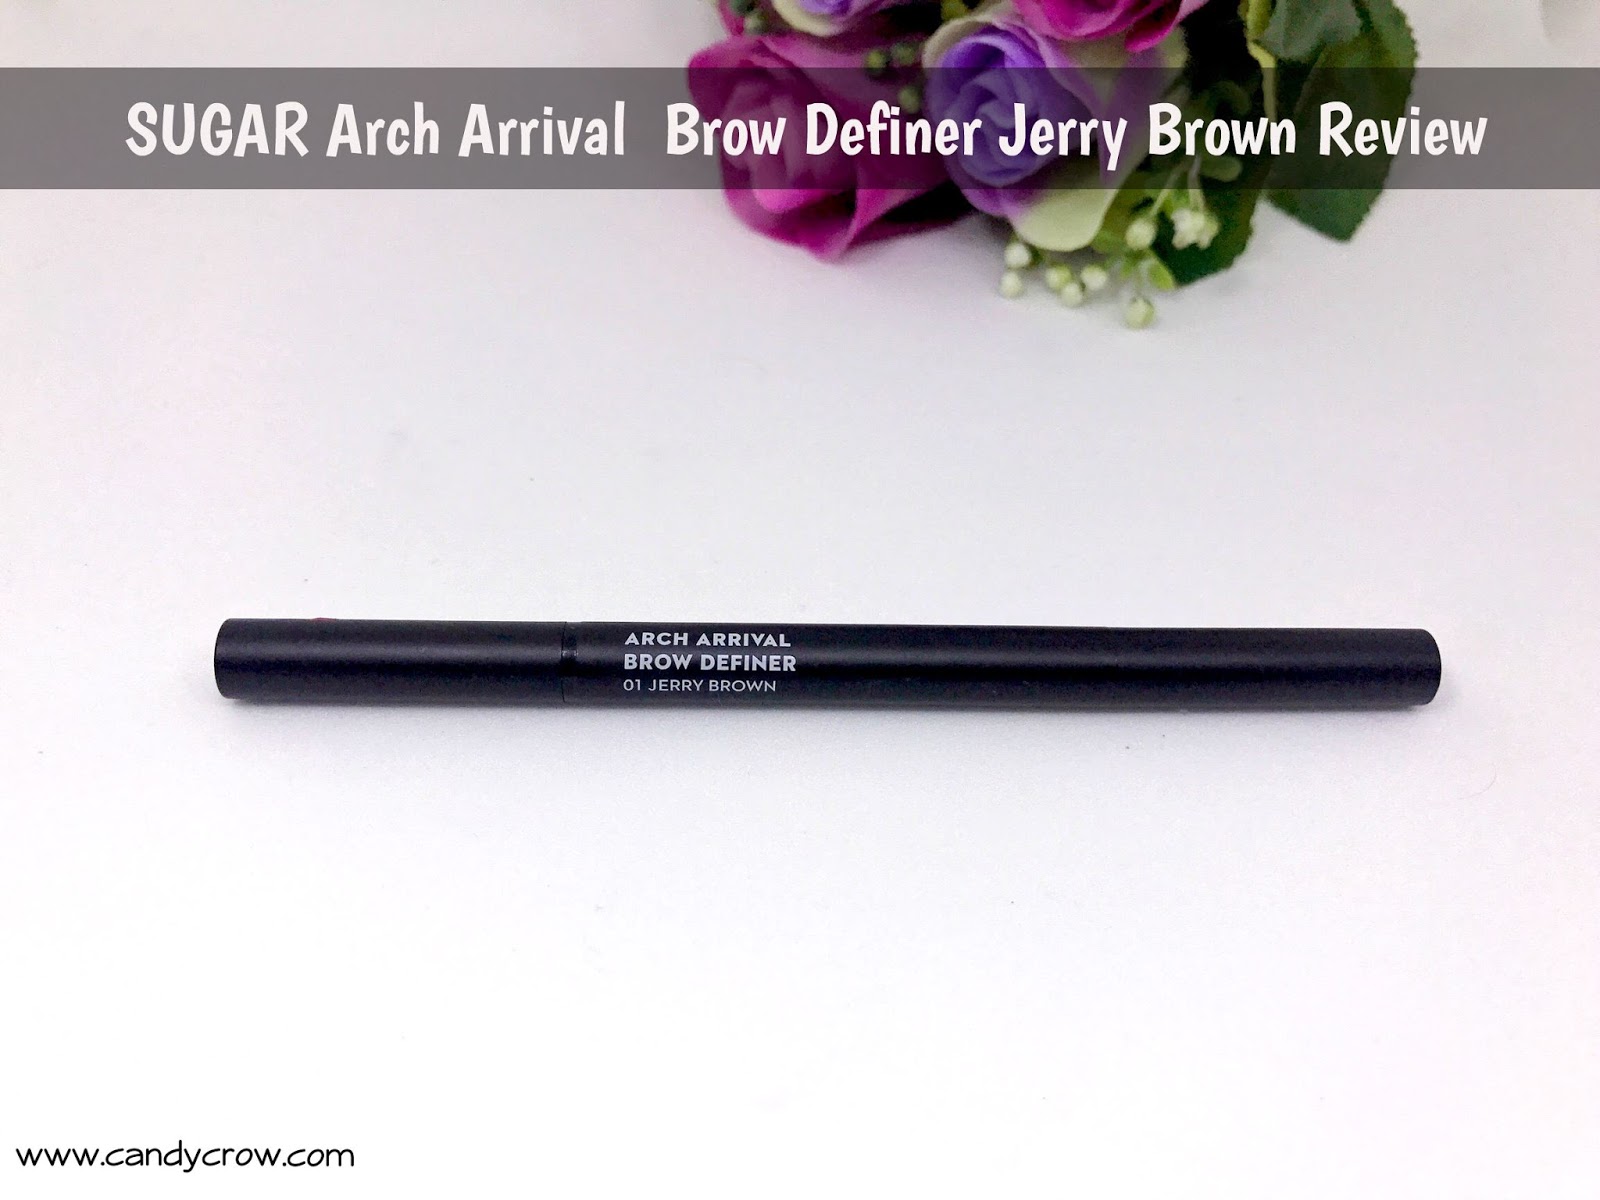 SUGAR Arch Arrival Brow Definer Jerry Brown Review